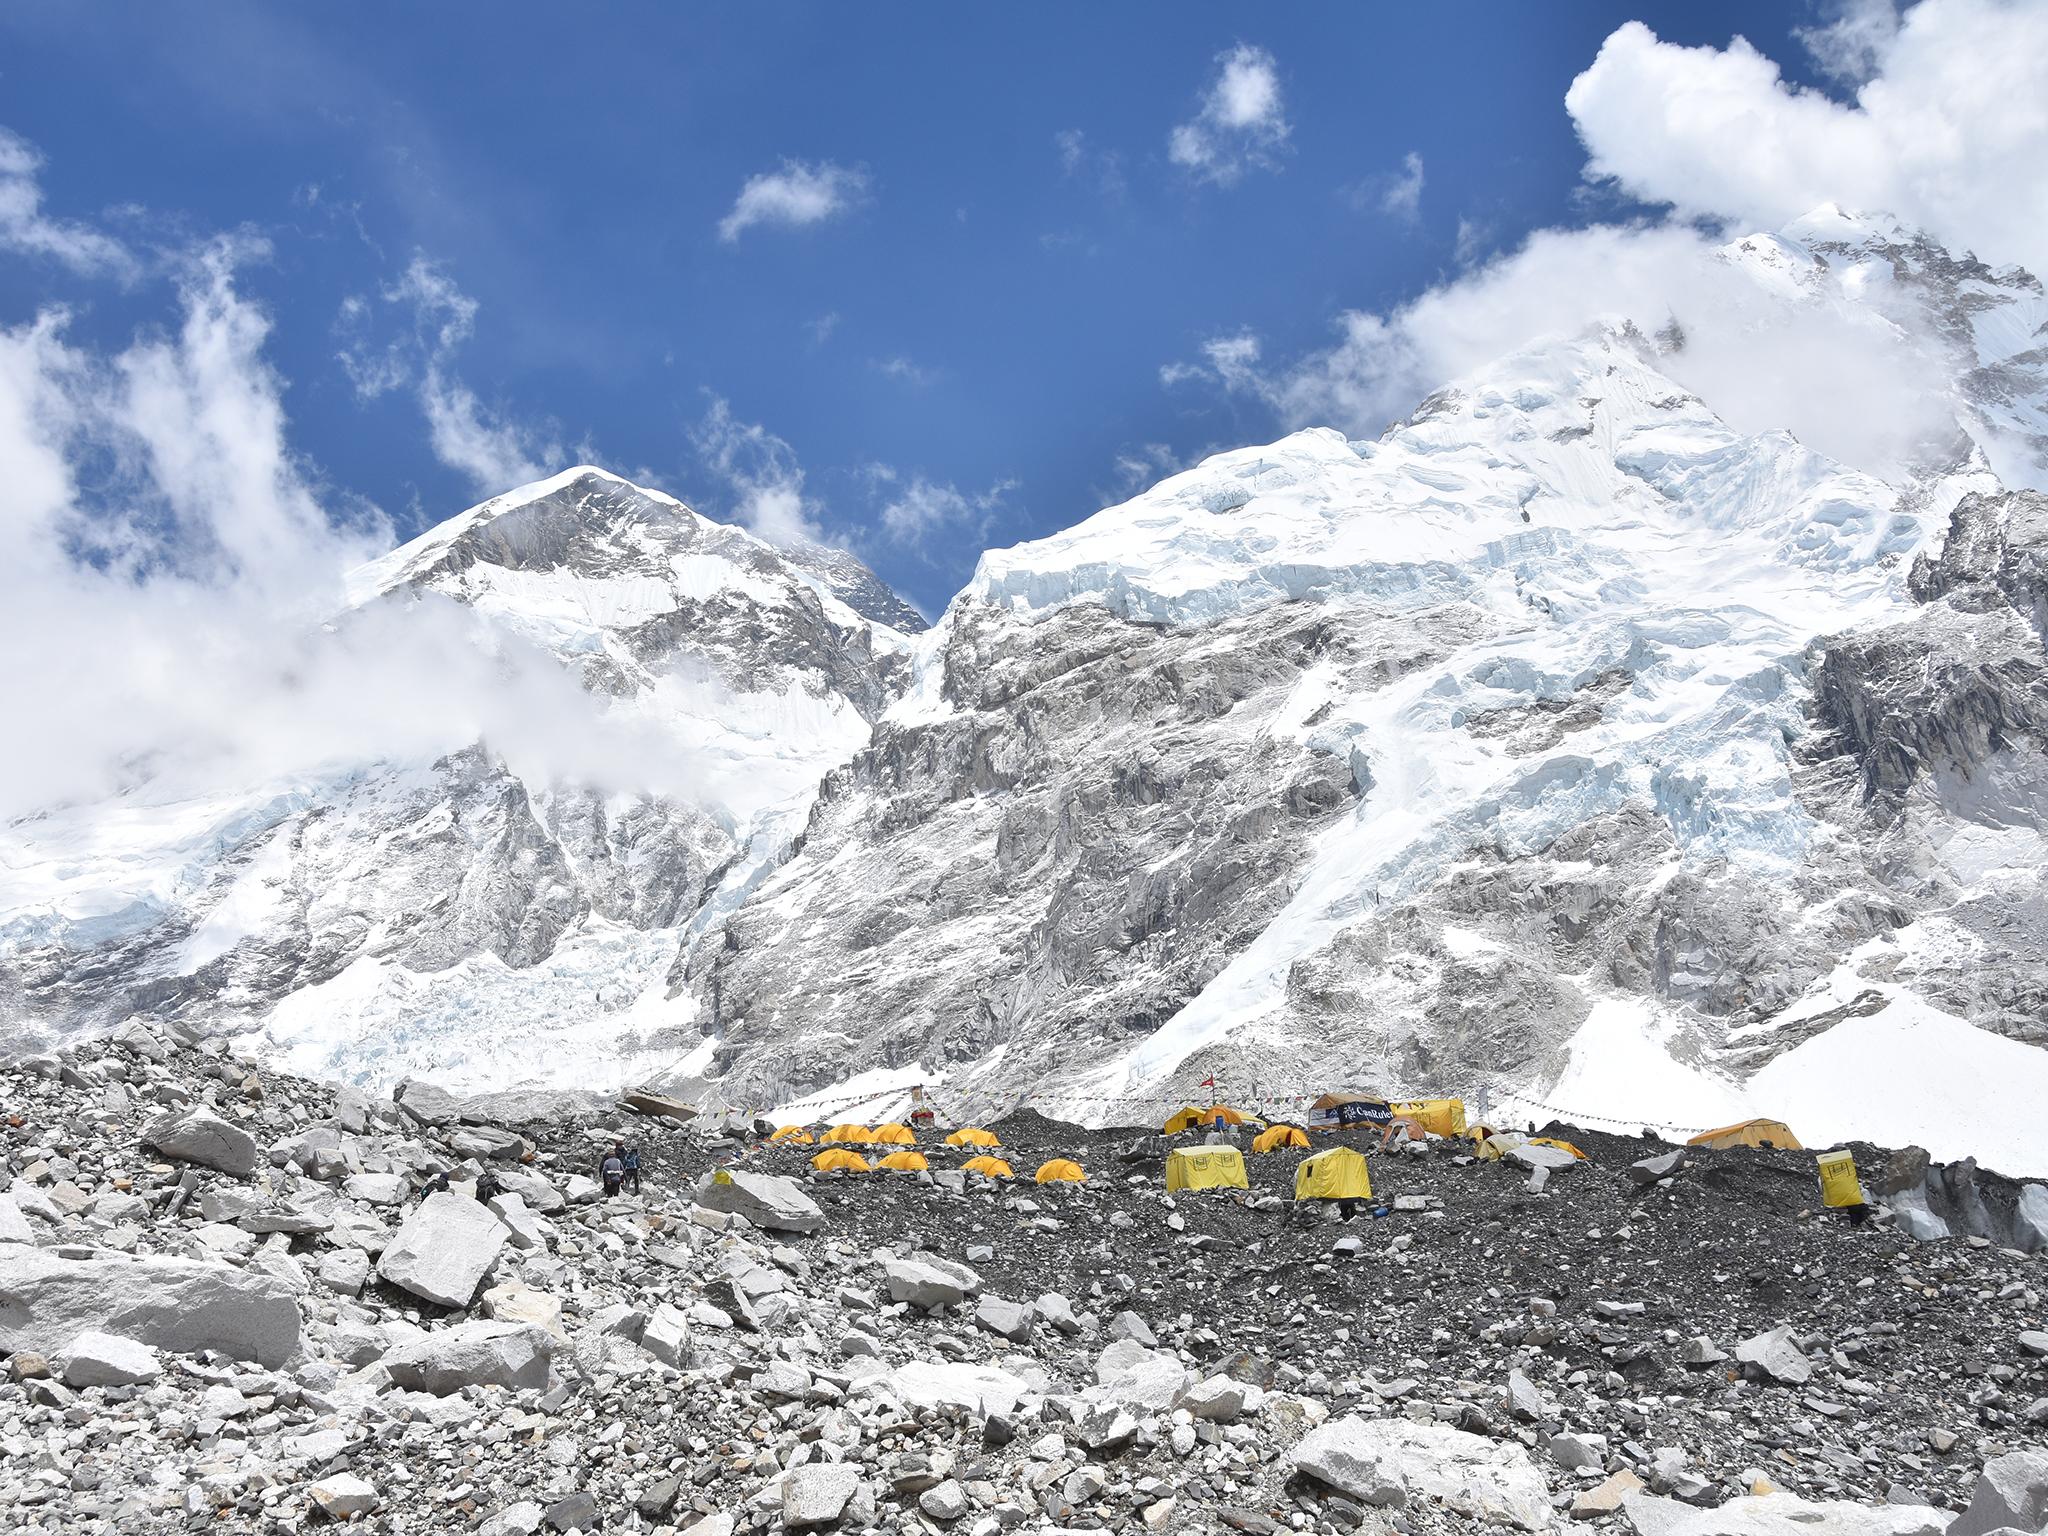 Everest base camp: 11 climbers have died in recent weeks trying to reach the summit